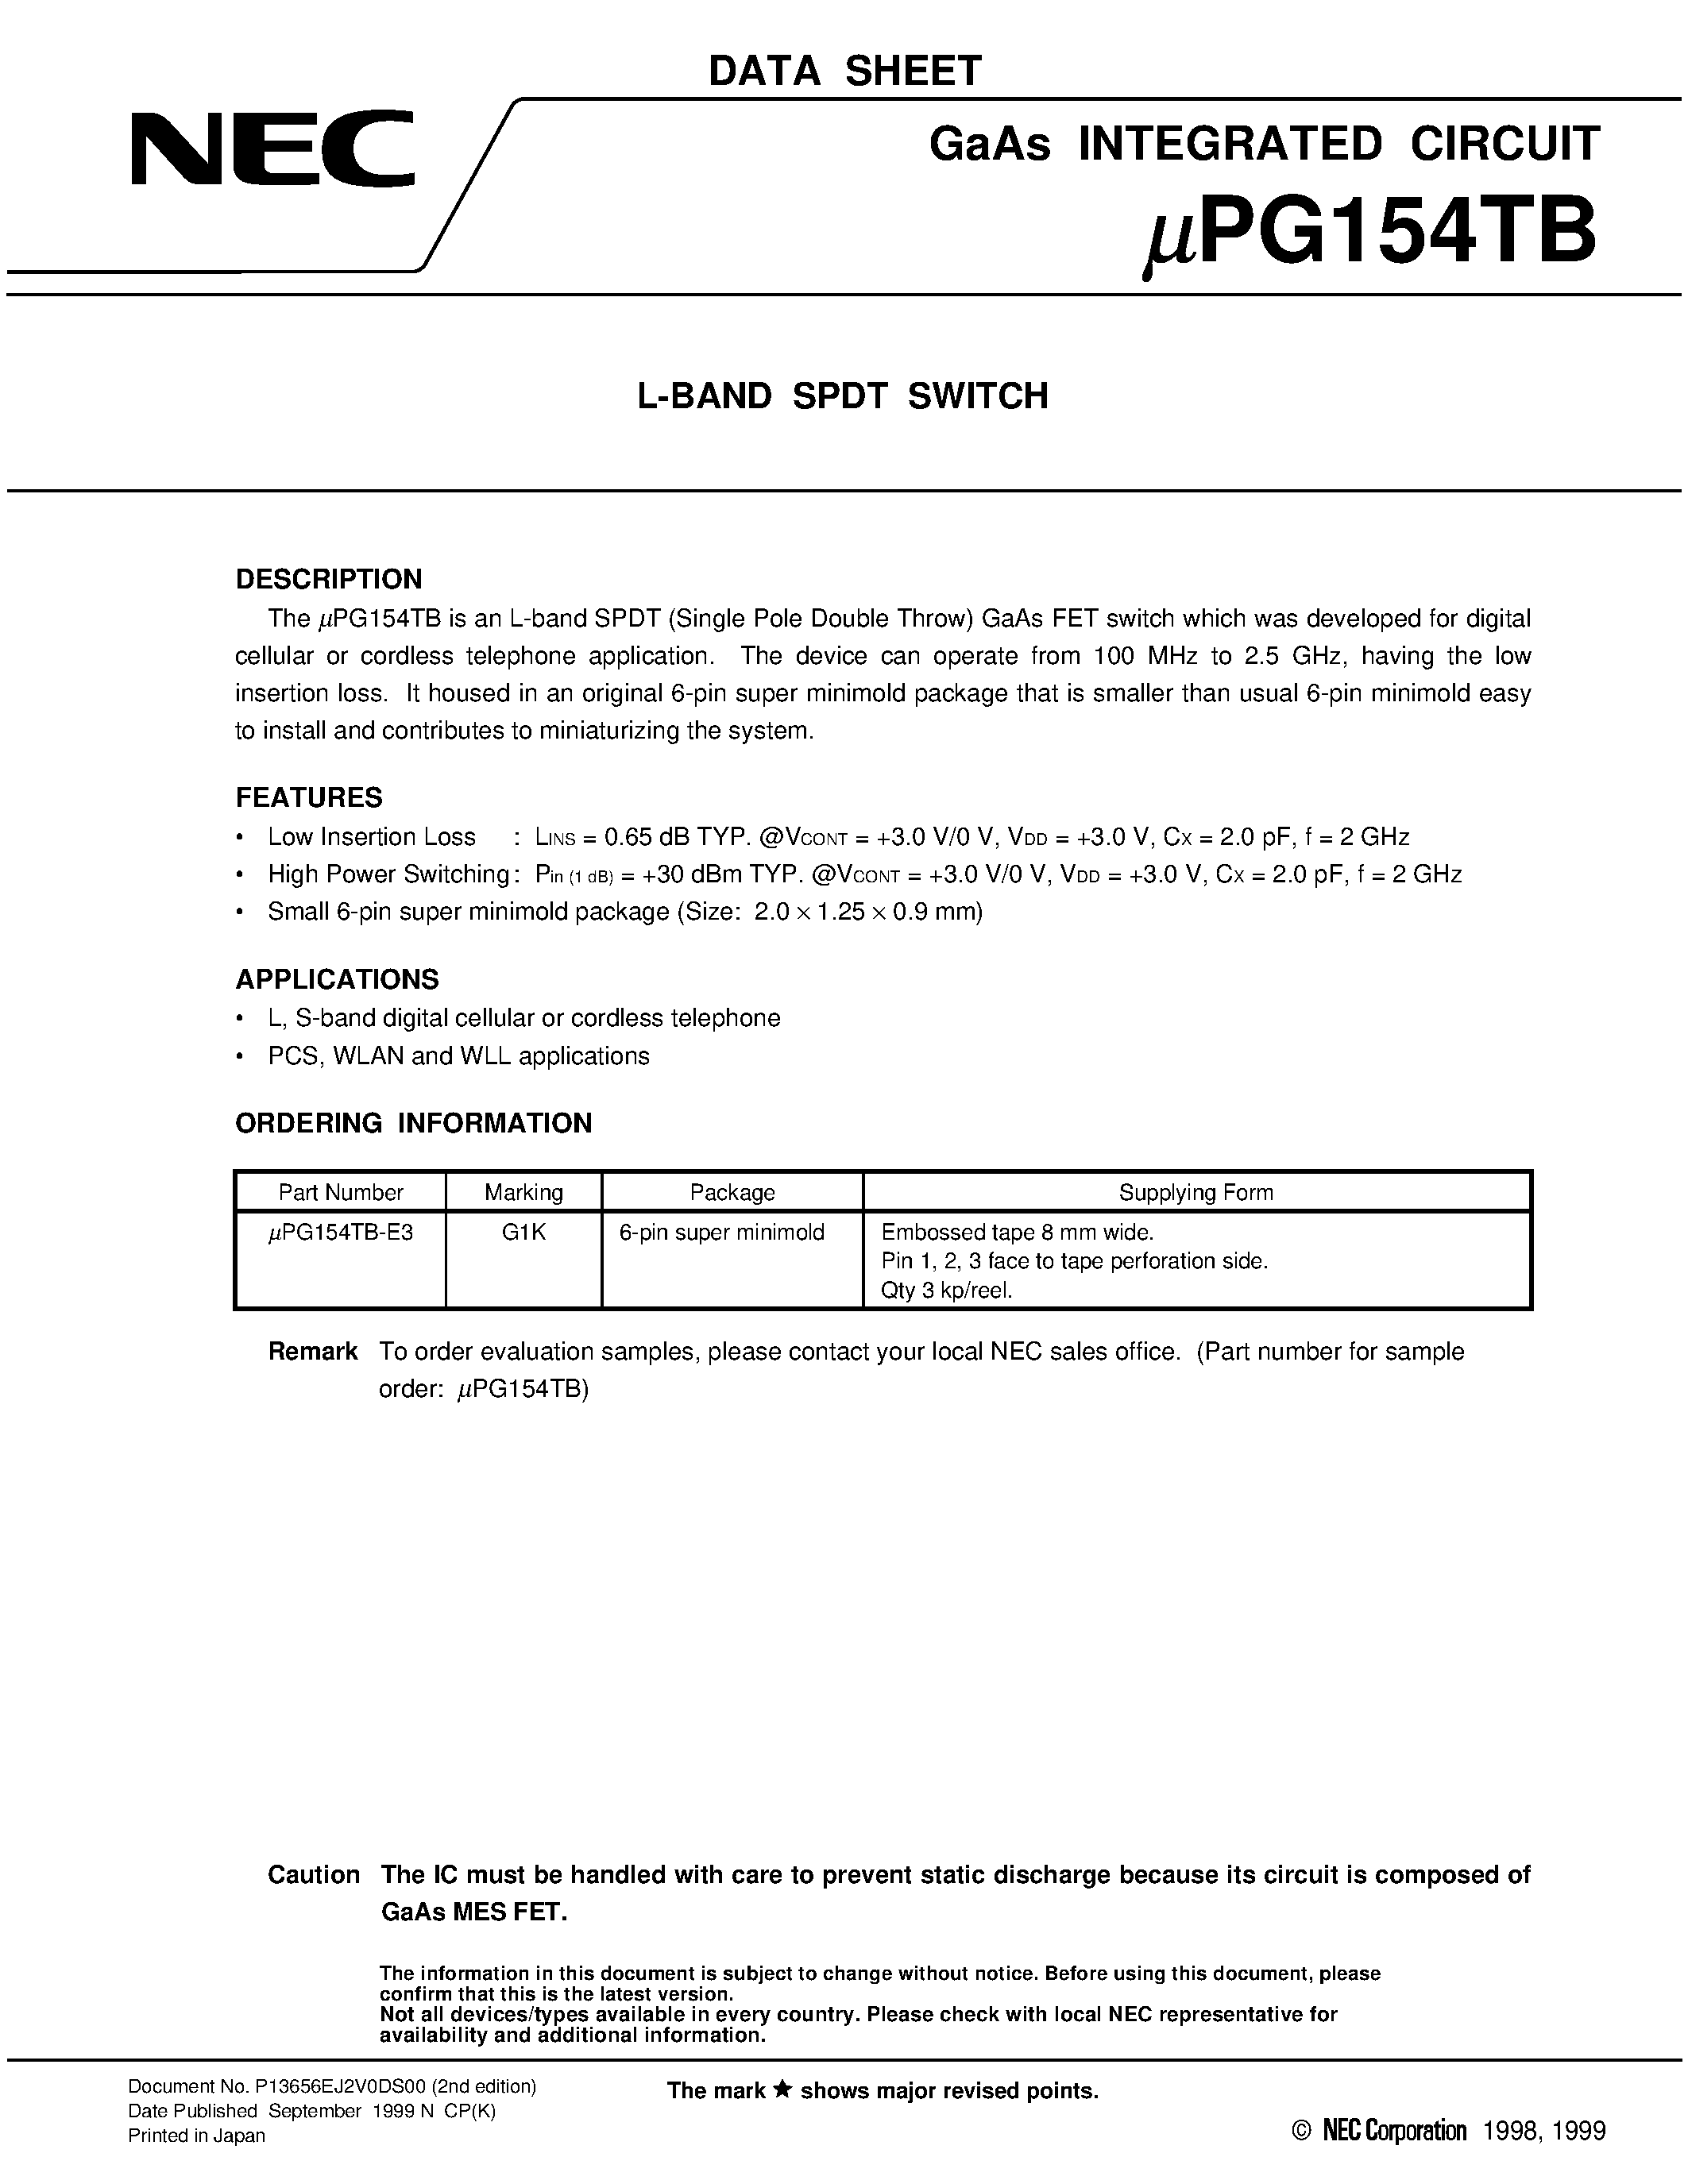 Datasheet UPG154TB-E3 - L-BAND SPDT SWITCH page 1